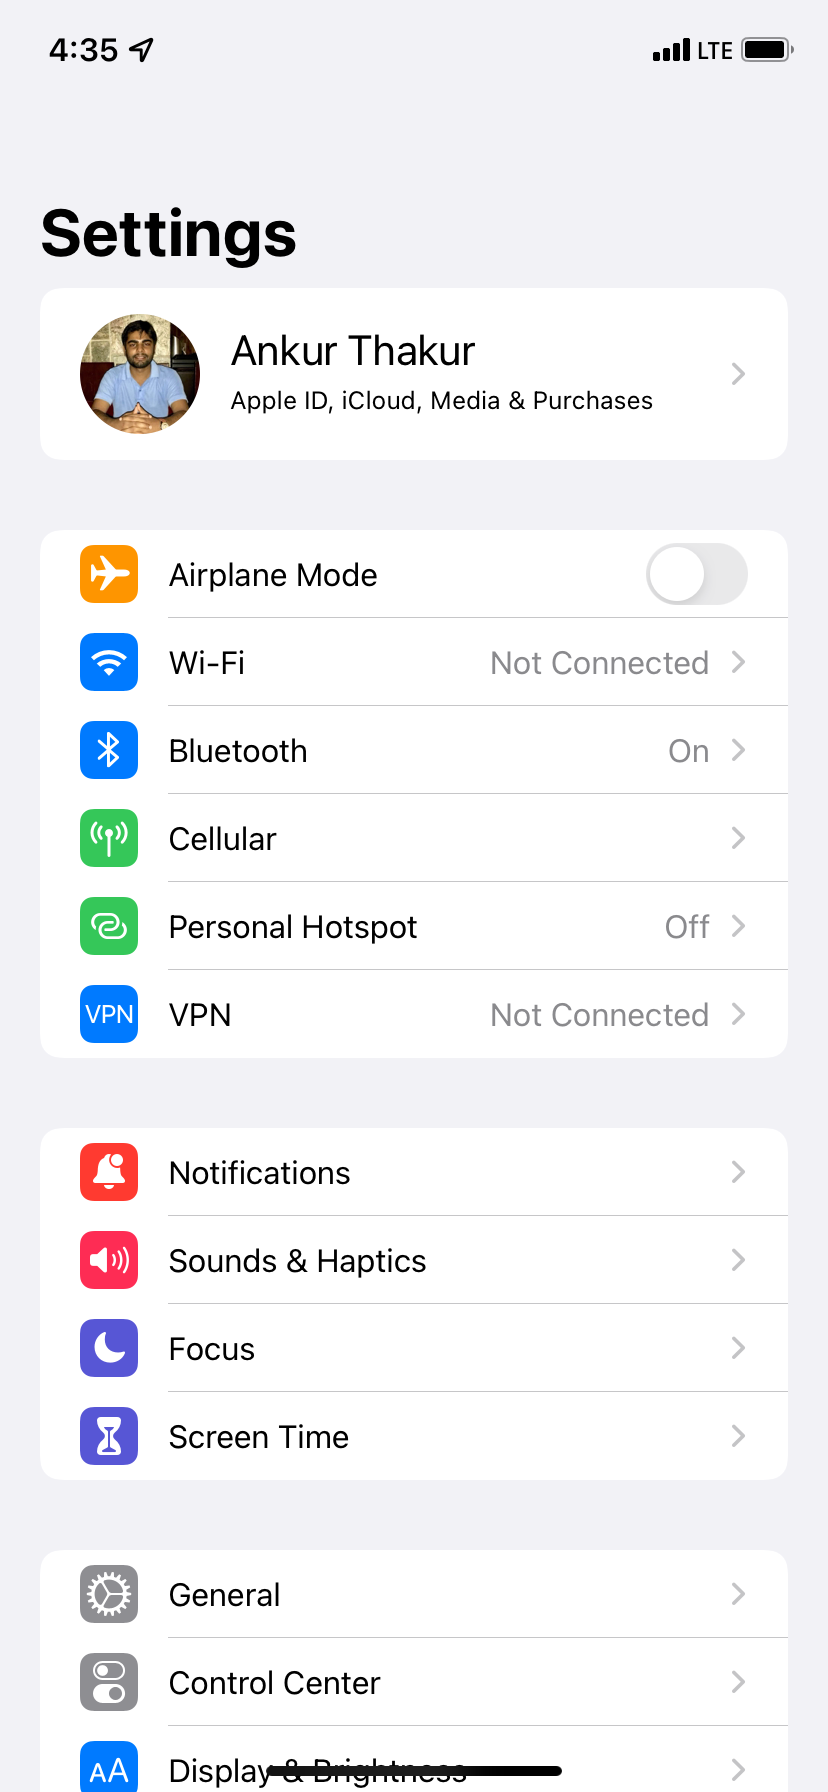 iPhone Settings app showing Notifications option